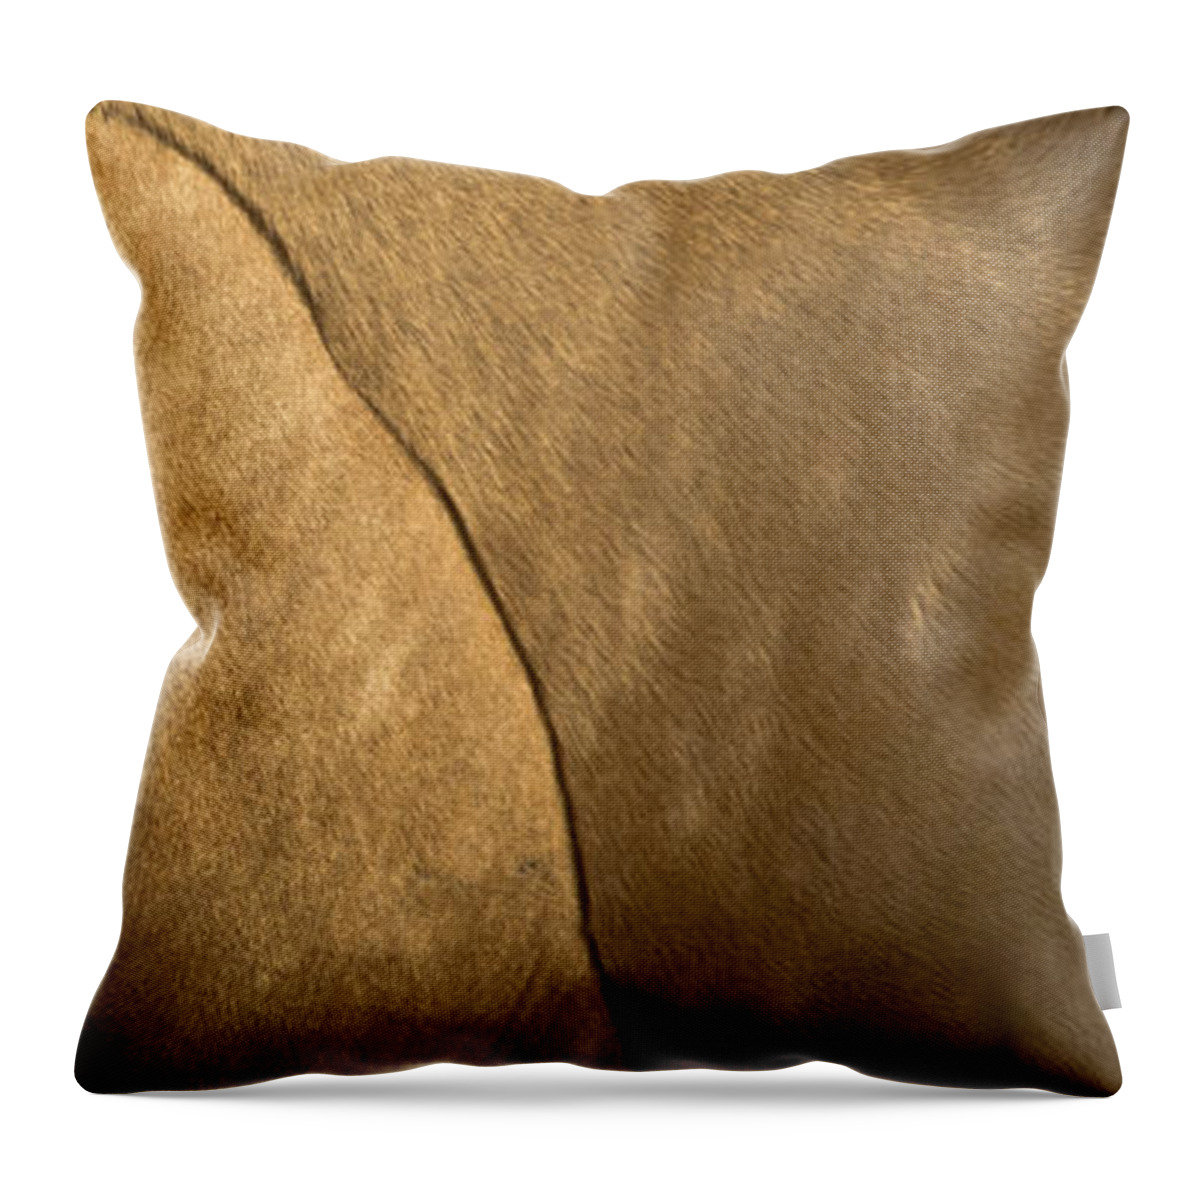 Andalusia Throw Pillow featuring the photograph Tupelo 2 by Catherine Sobredo